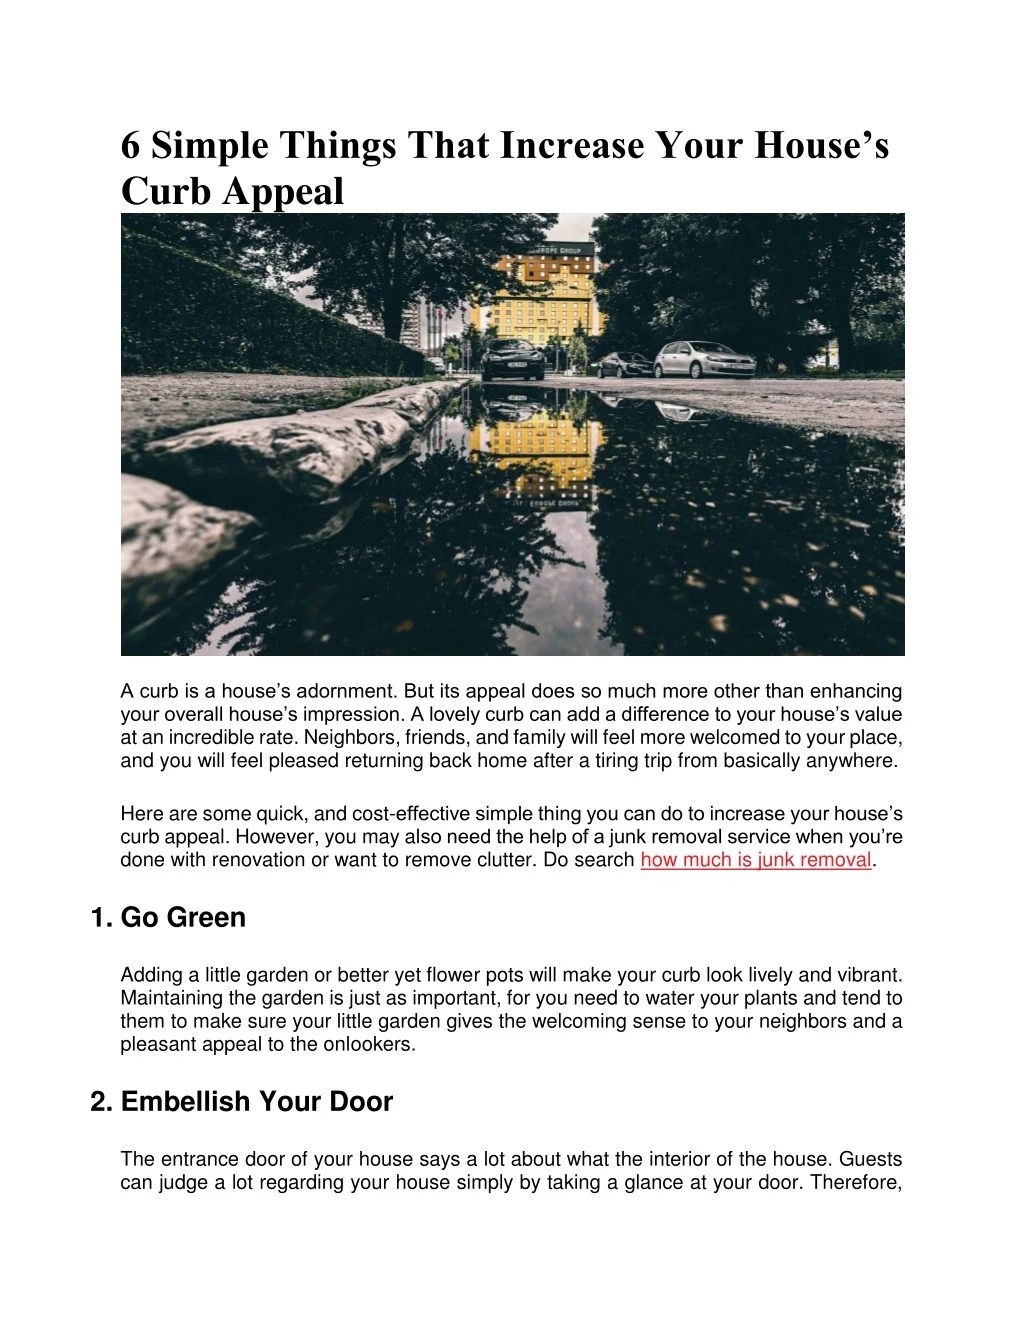 6 simple things that increase your house s curb